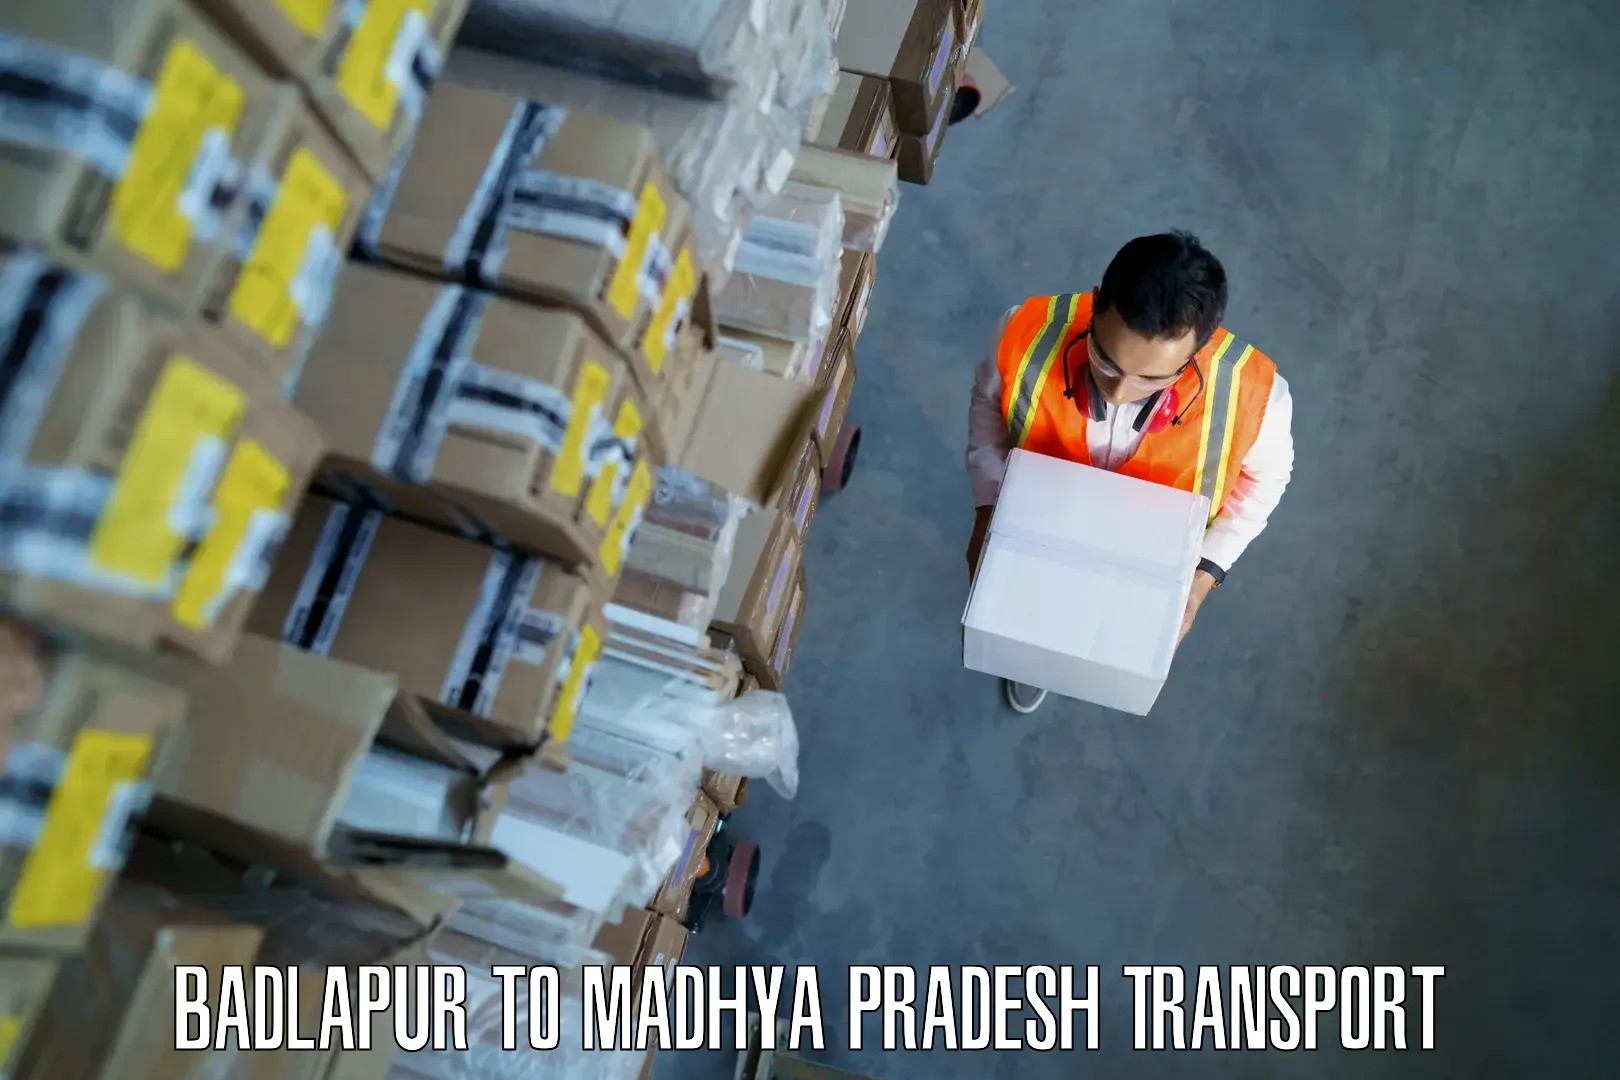 Delivery service Badlapur to IIIT Bhopal